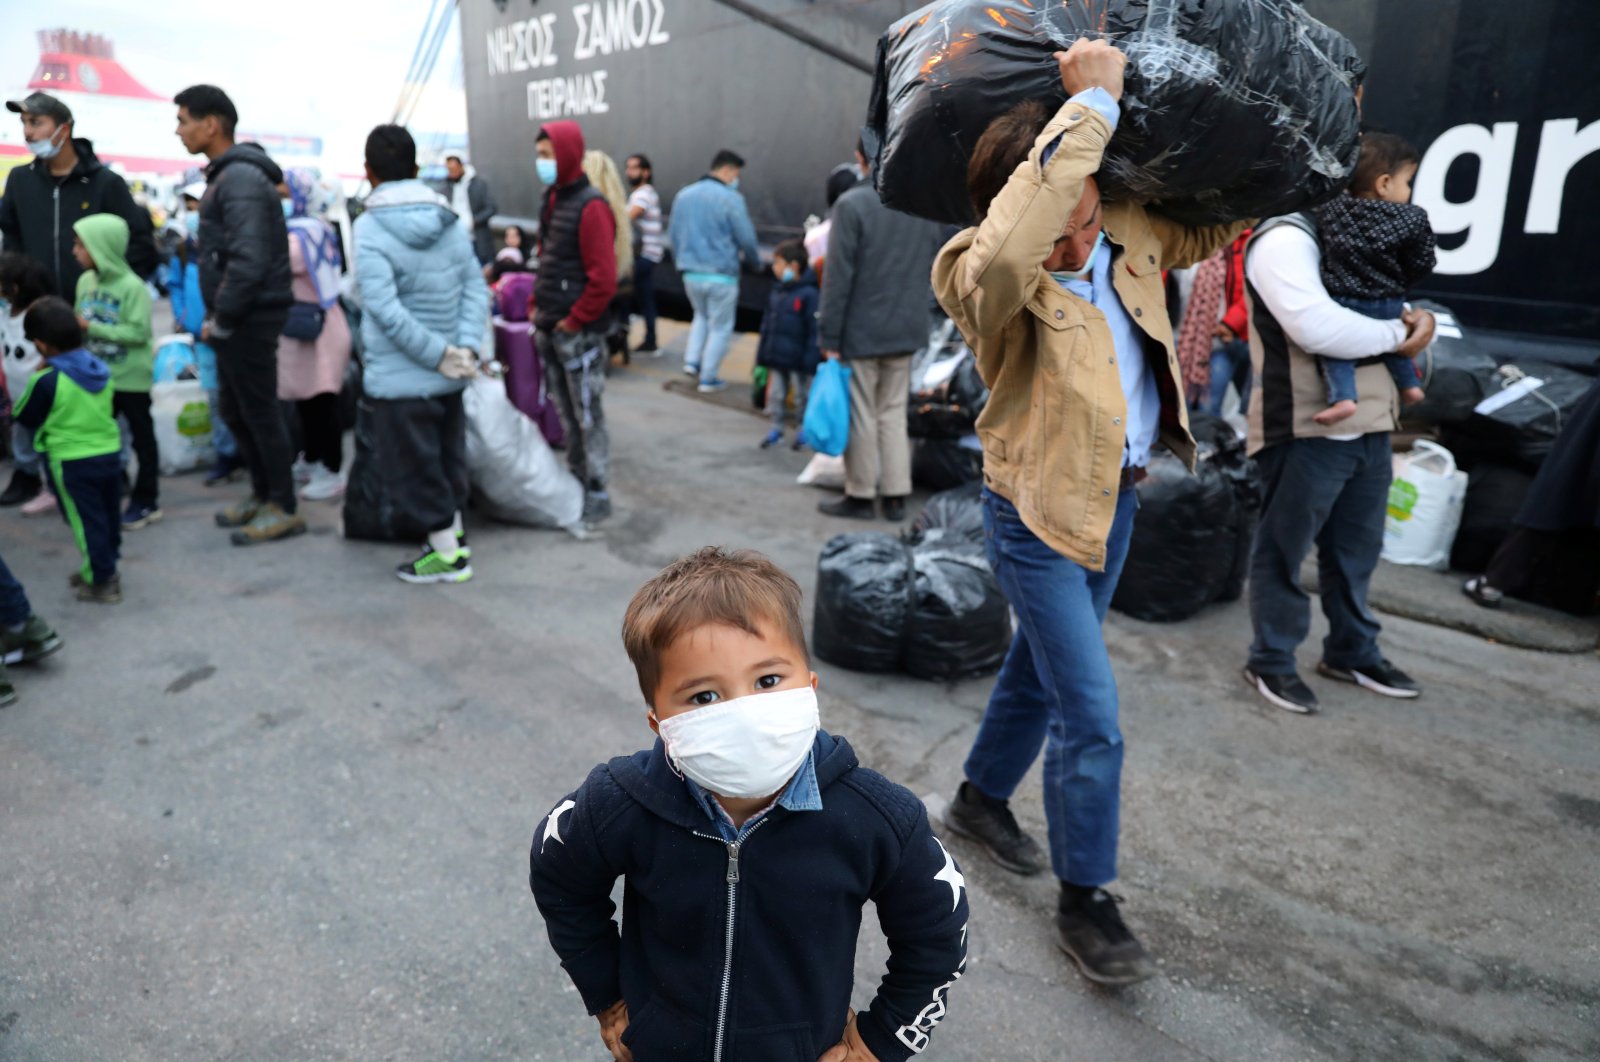 A migrant boy from the Moria camp in Lesbos waits to board a bus at Piraeus port in Athens following the coronavirus disease (COVID-19) outbreak, Greece, May 4, 2020. (Reuters Photo)